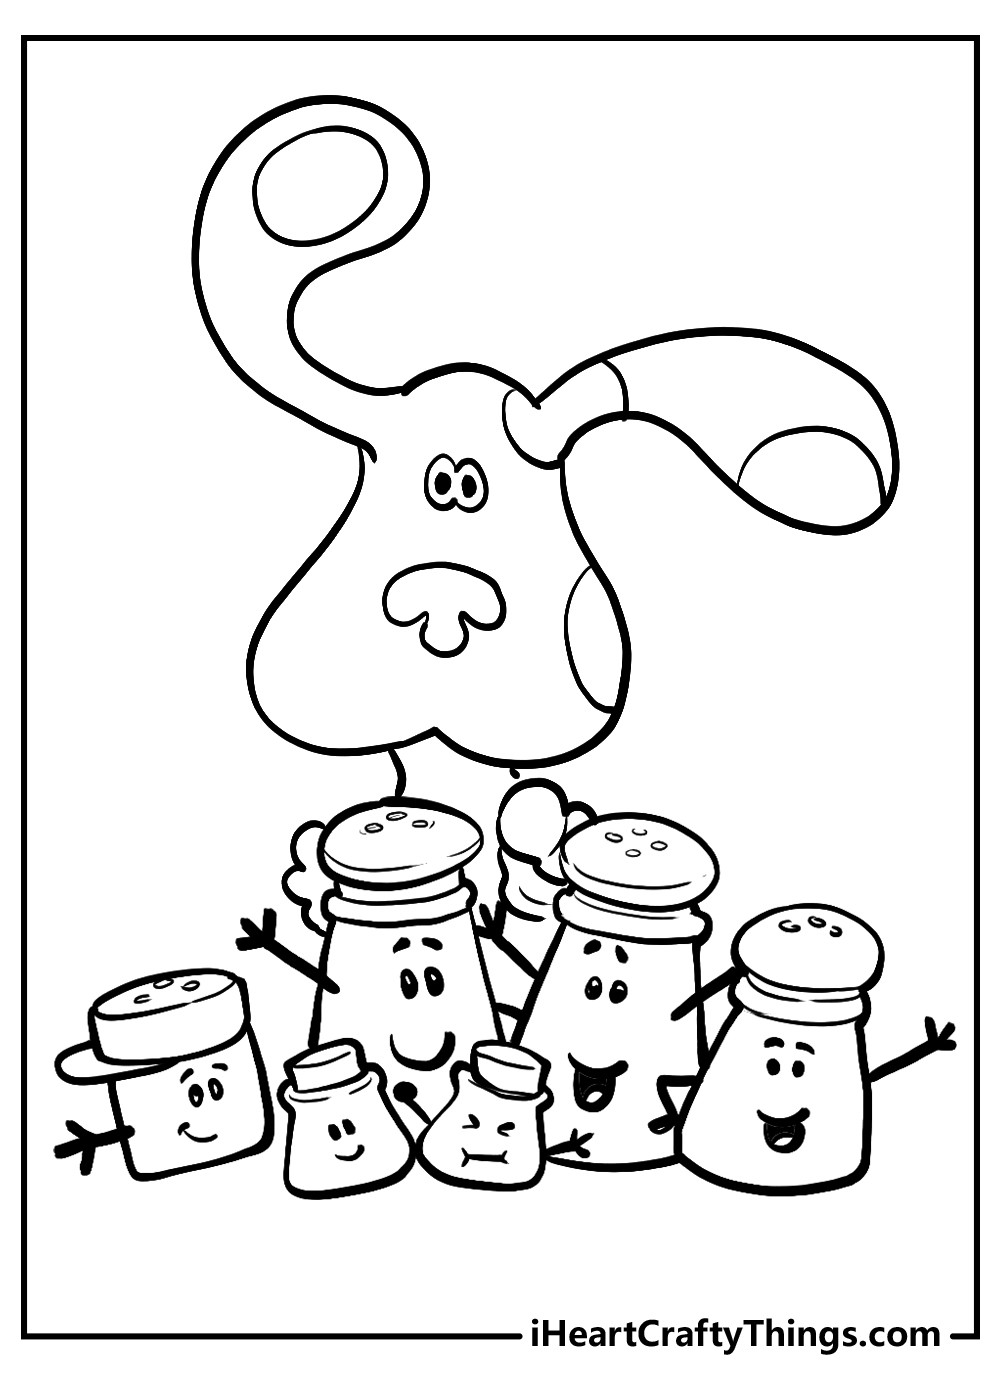 blue's clues coloring activity book